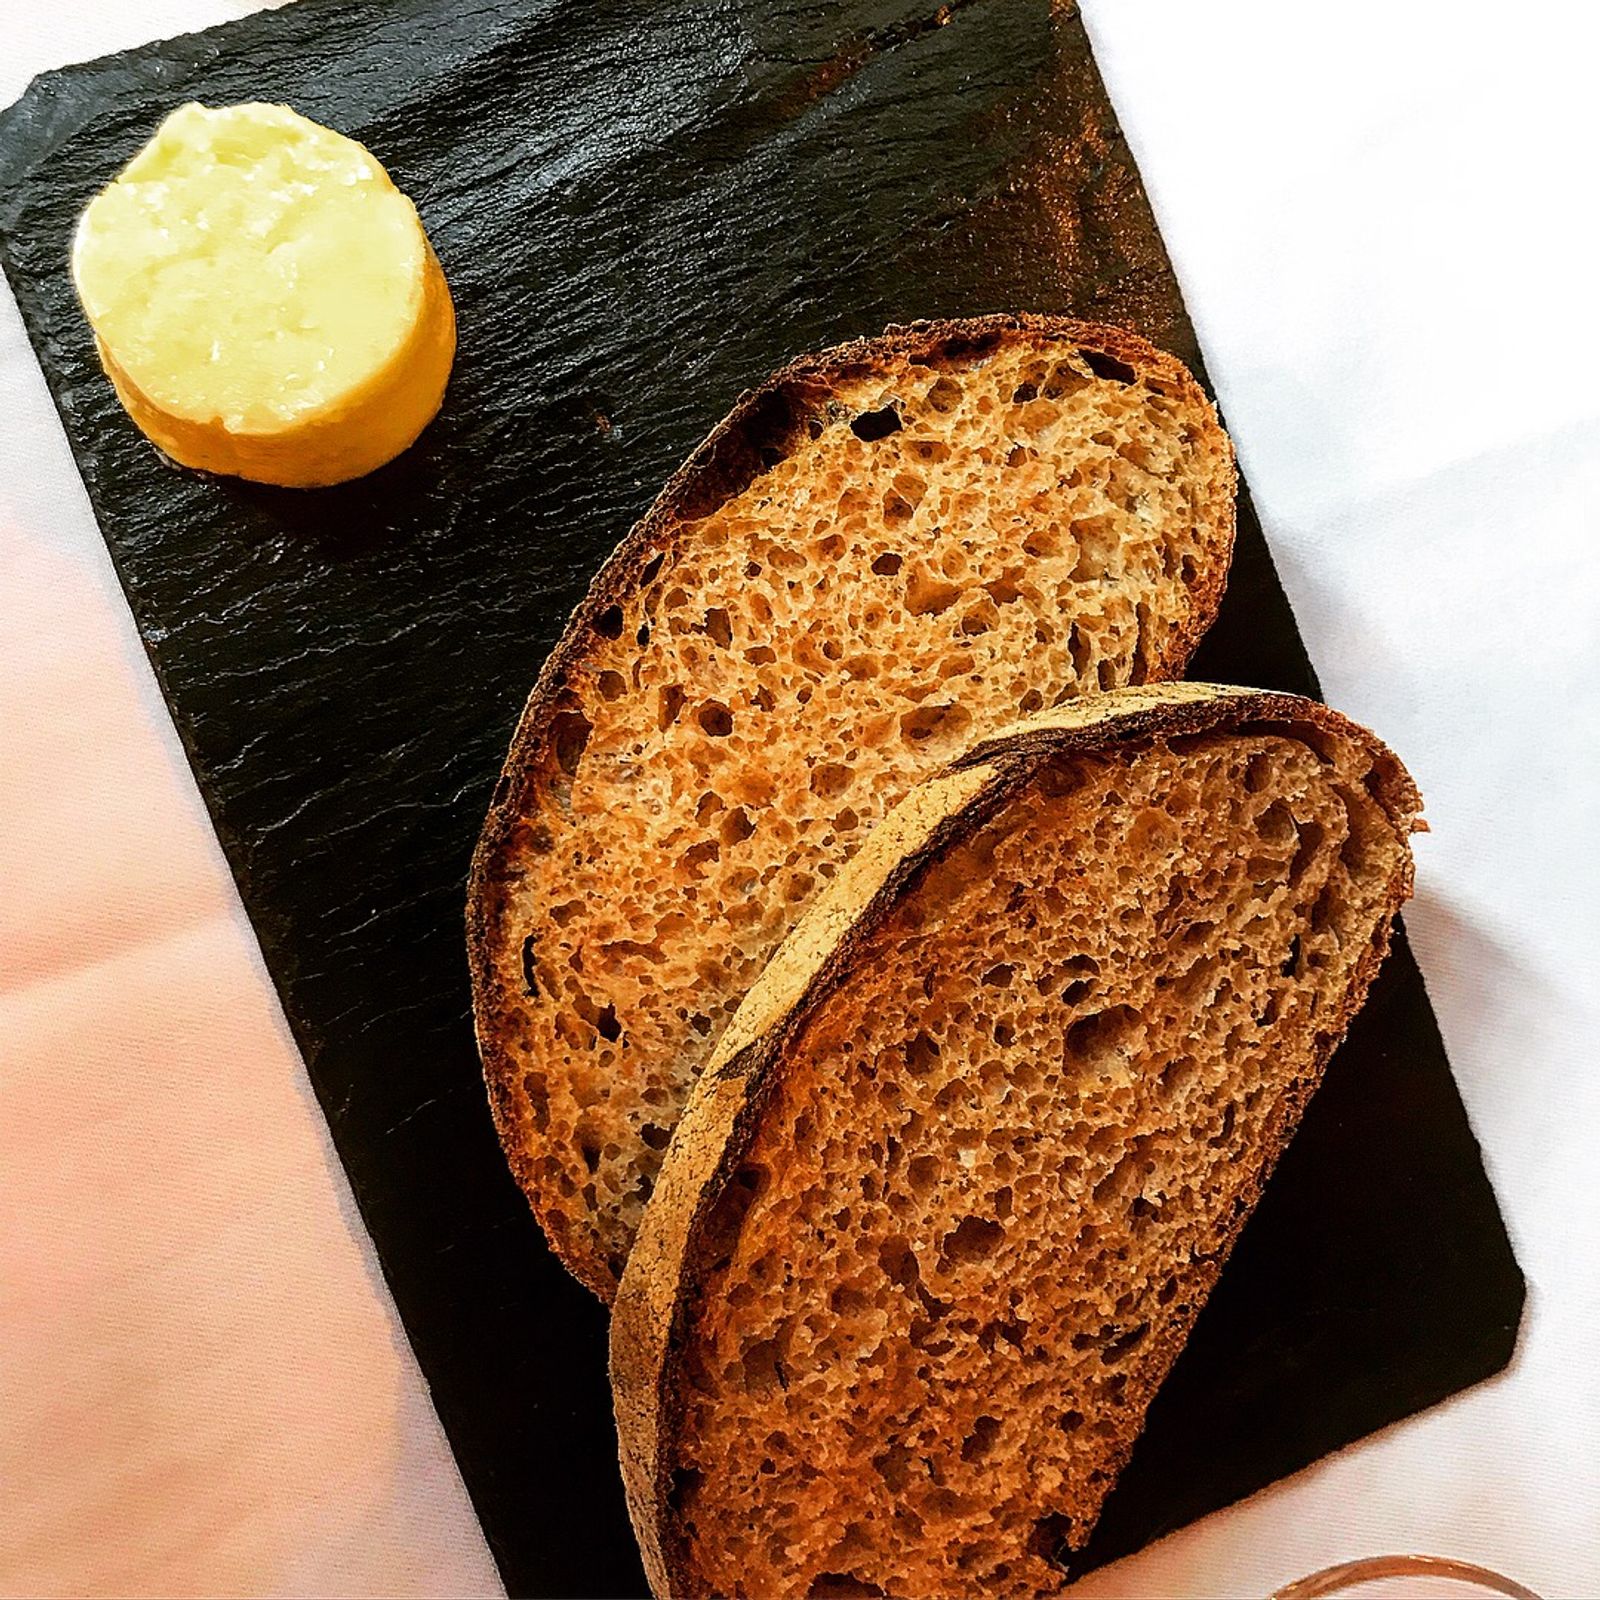 Sourdough bread and cultured butter - The Granary in Newtown